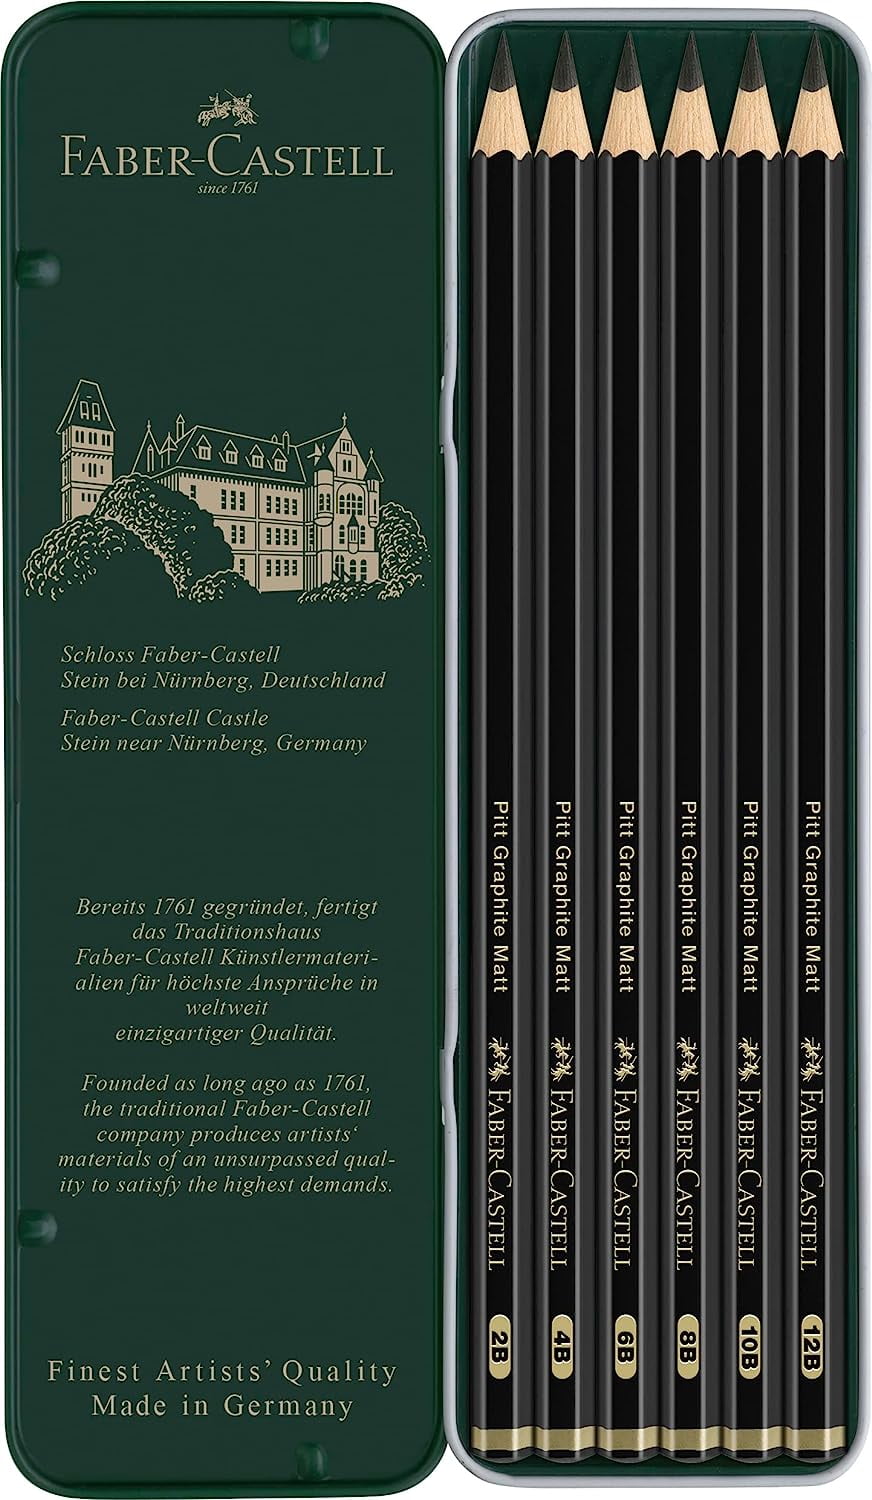 FABER-CASTELL Blister Set Pitt Graphite 5 crayons - gomme - taille-crayon -  Crayon & porte-mine - LDLC